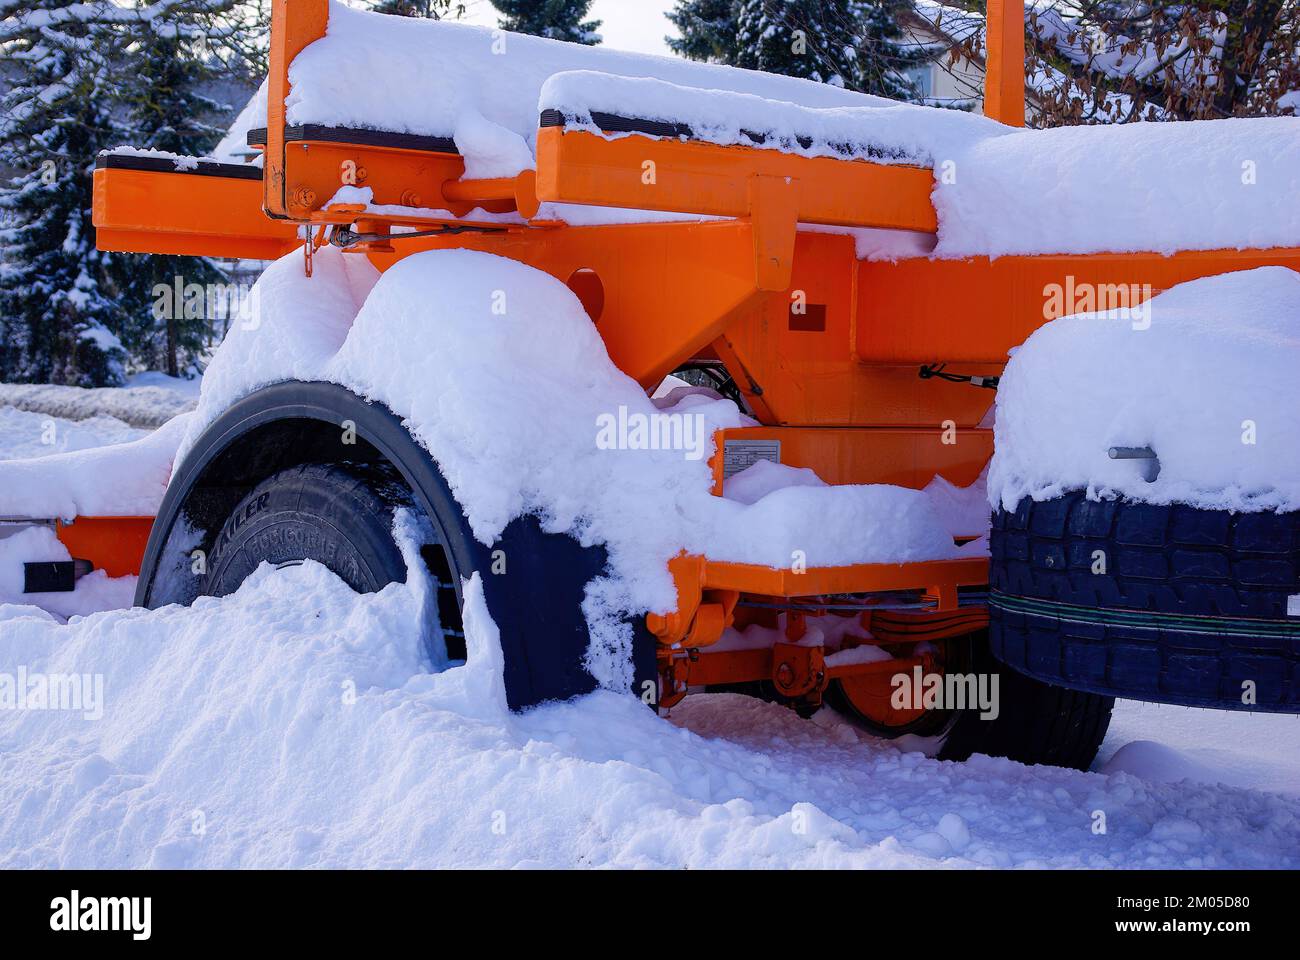 Snow-covered low loader or articulated lorry with a wheel stuck in the snow in winter. Stock Photo